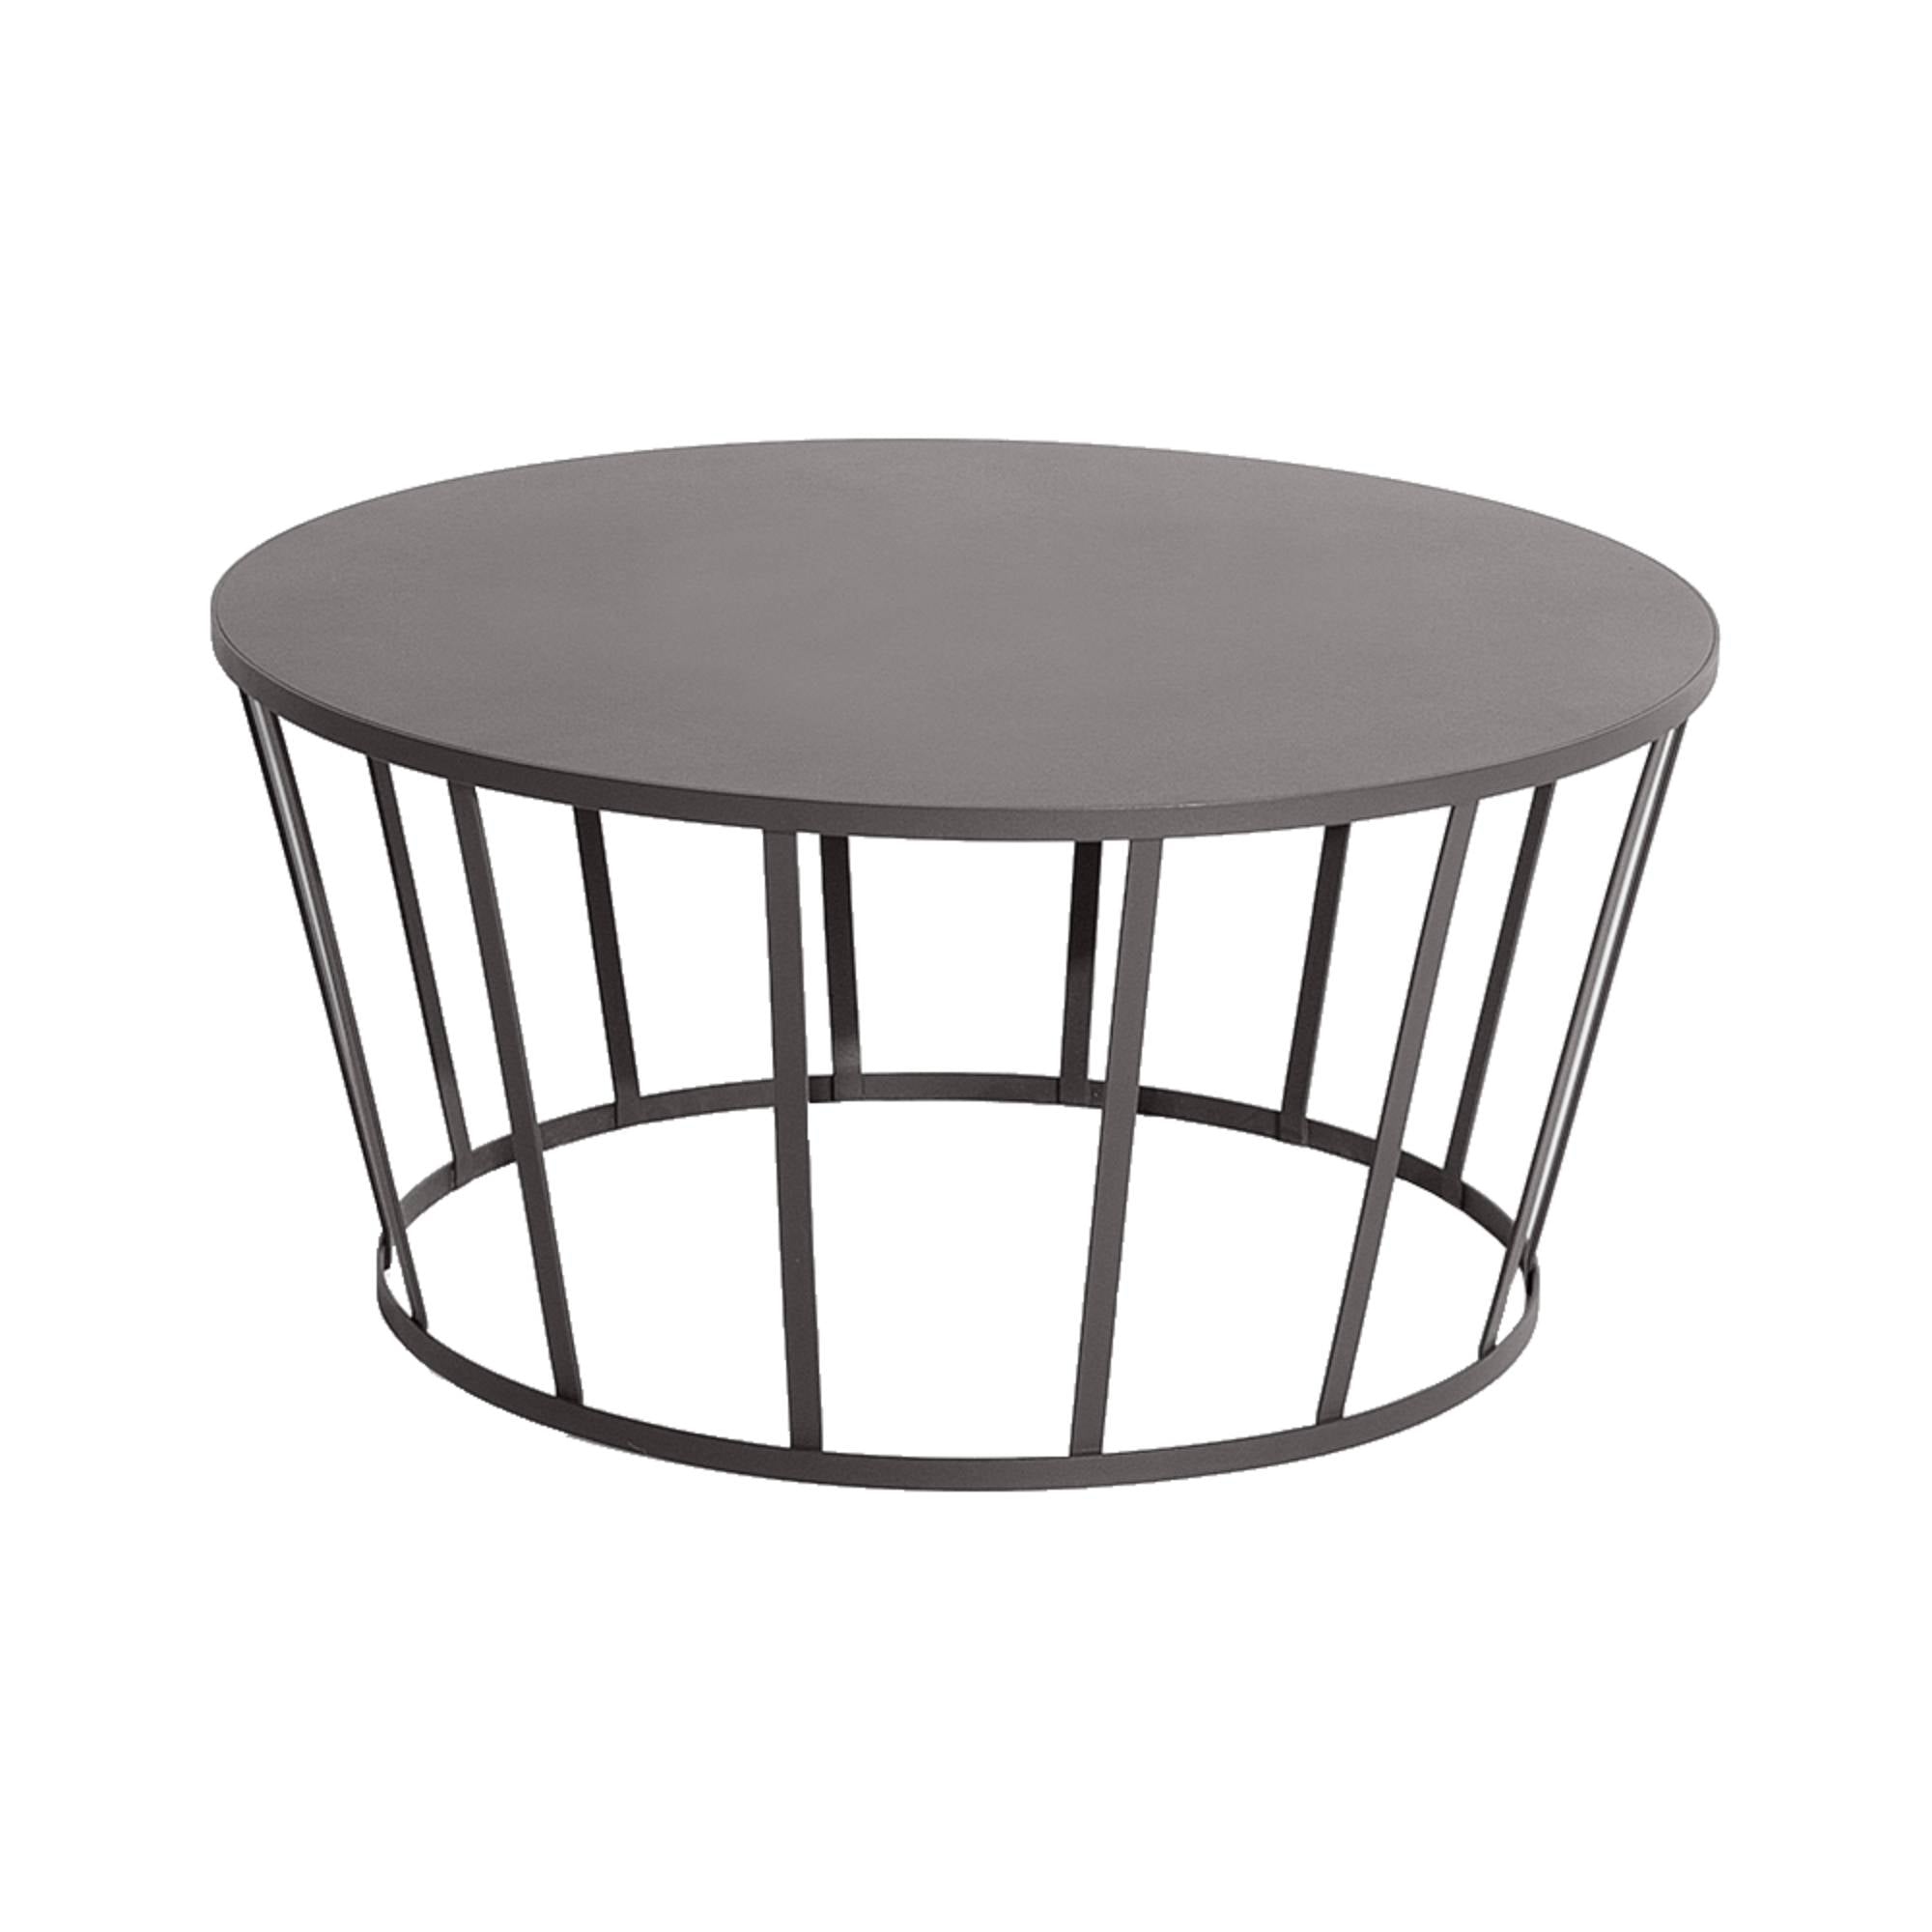 Hollo Coffee Table: Anthracite